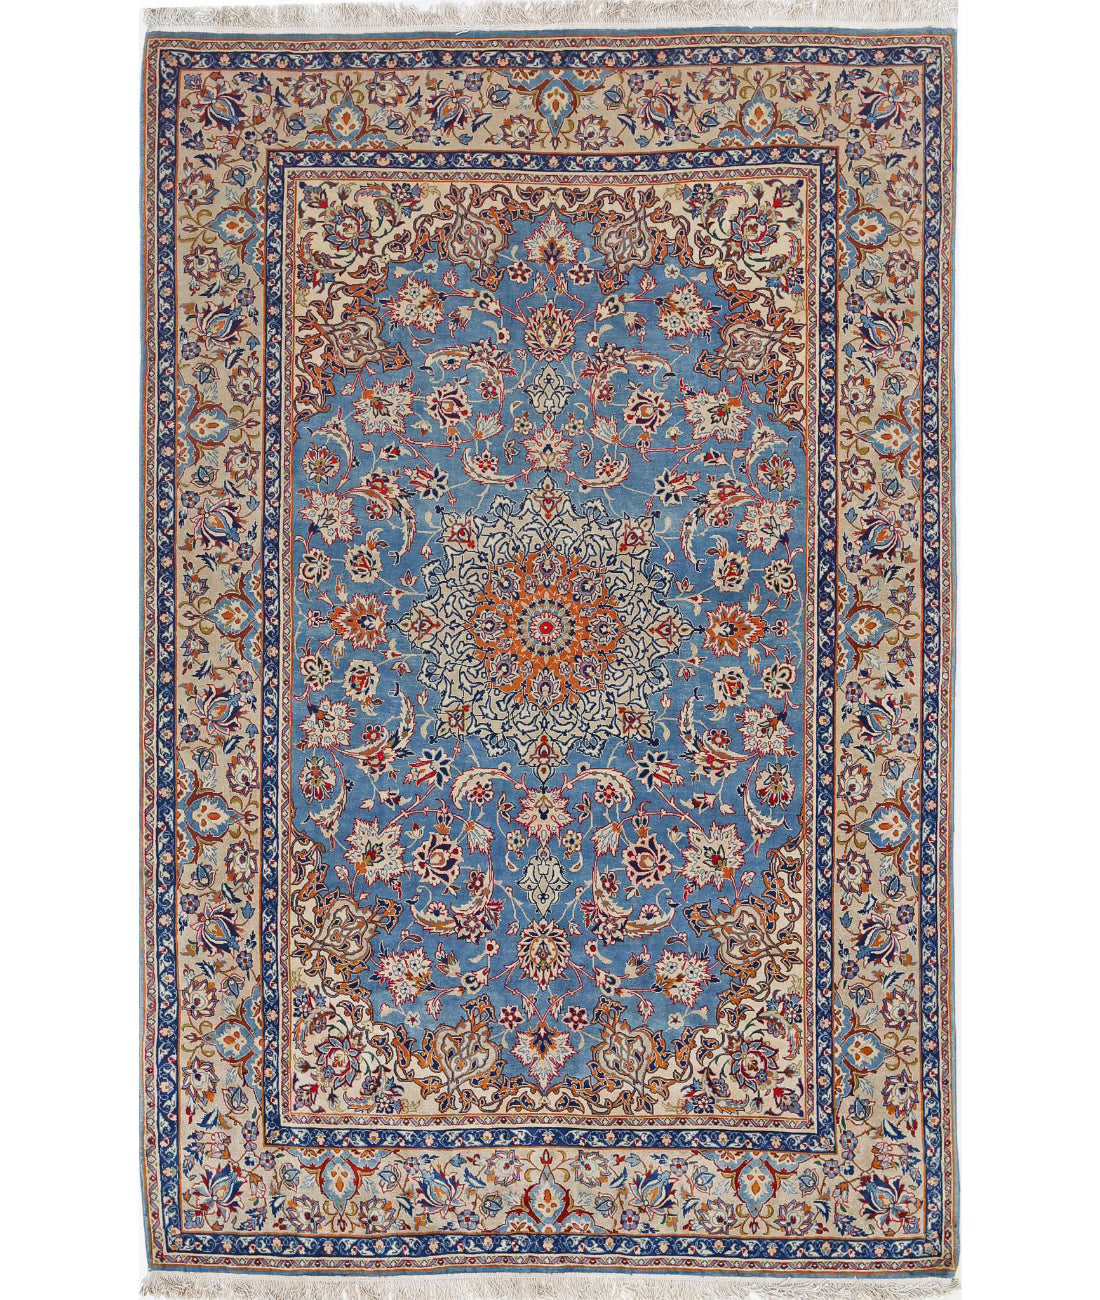 Hand Knotted Masterpiece Persian Isfahan Wool &amp; Silk Rug - 3&#39;6&#39;&#39; x 5&#39;4&#39;&#39; 3&#39;6&#39;&#39; x 5&#39;4&#39;&#39; (105 X 160) / Blue / Beige